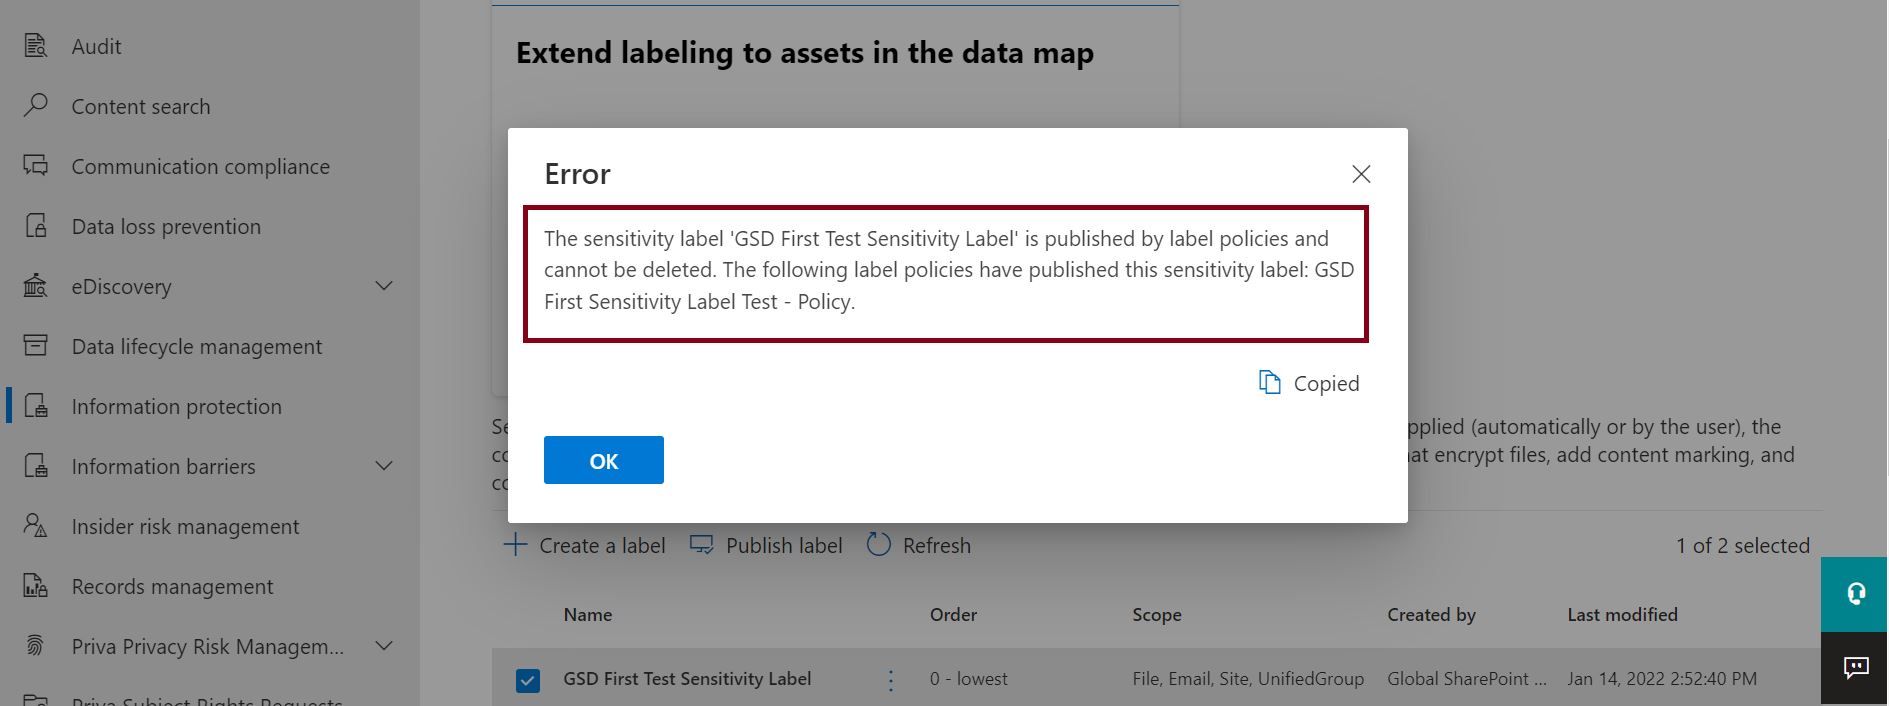 SharePoint sensitivity labels - the sensitivity label is published by label policies and cannot be deleted error